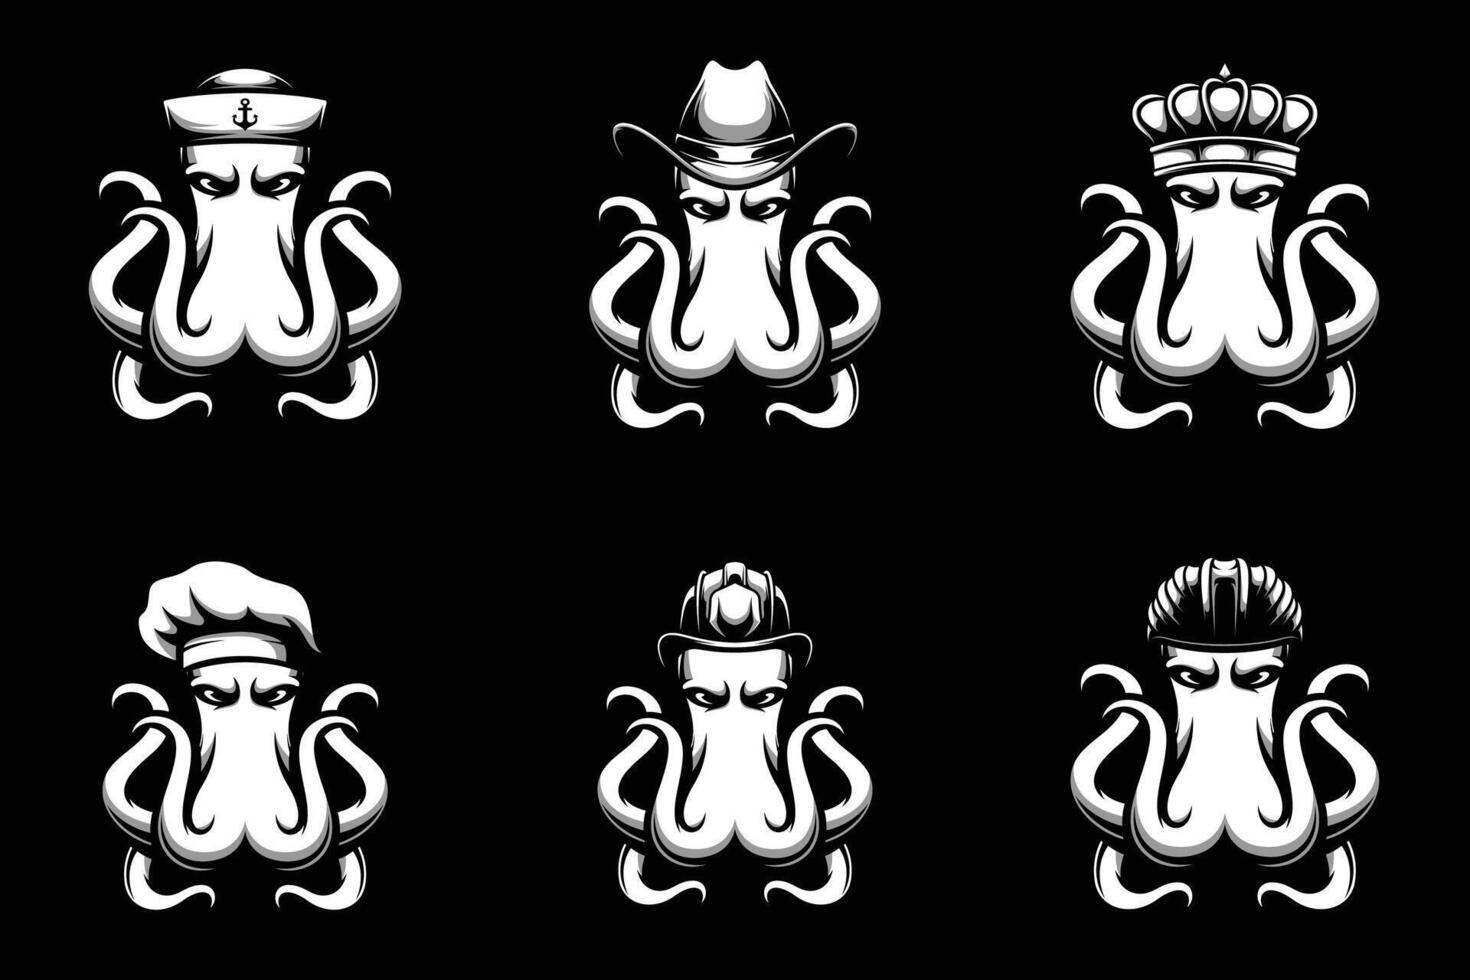 Octopus Heads Bundle Black and White vector